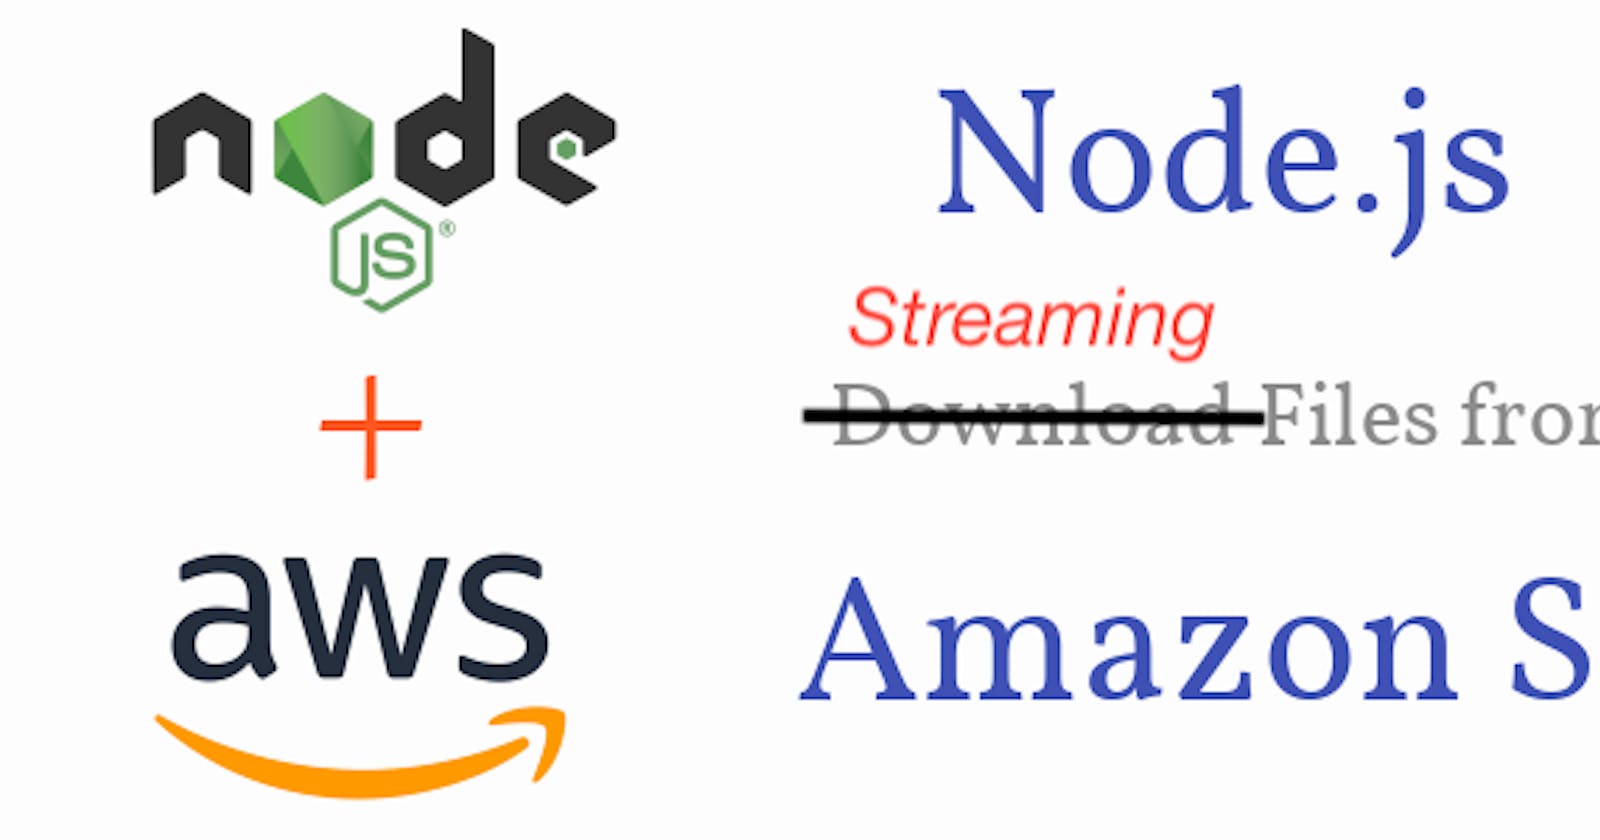 Streaming files from AWS S3 using NodeJS Stream API with Typescript